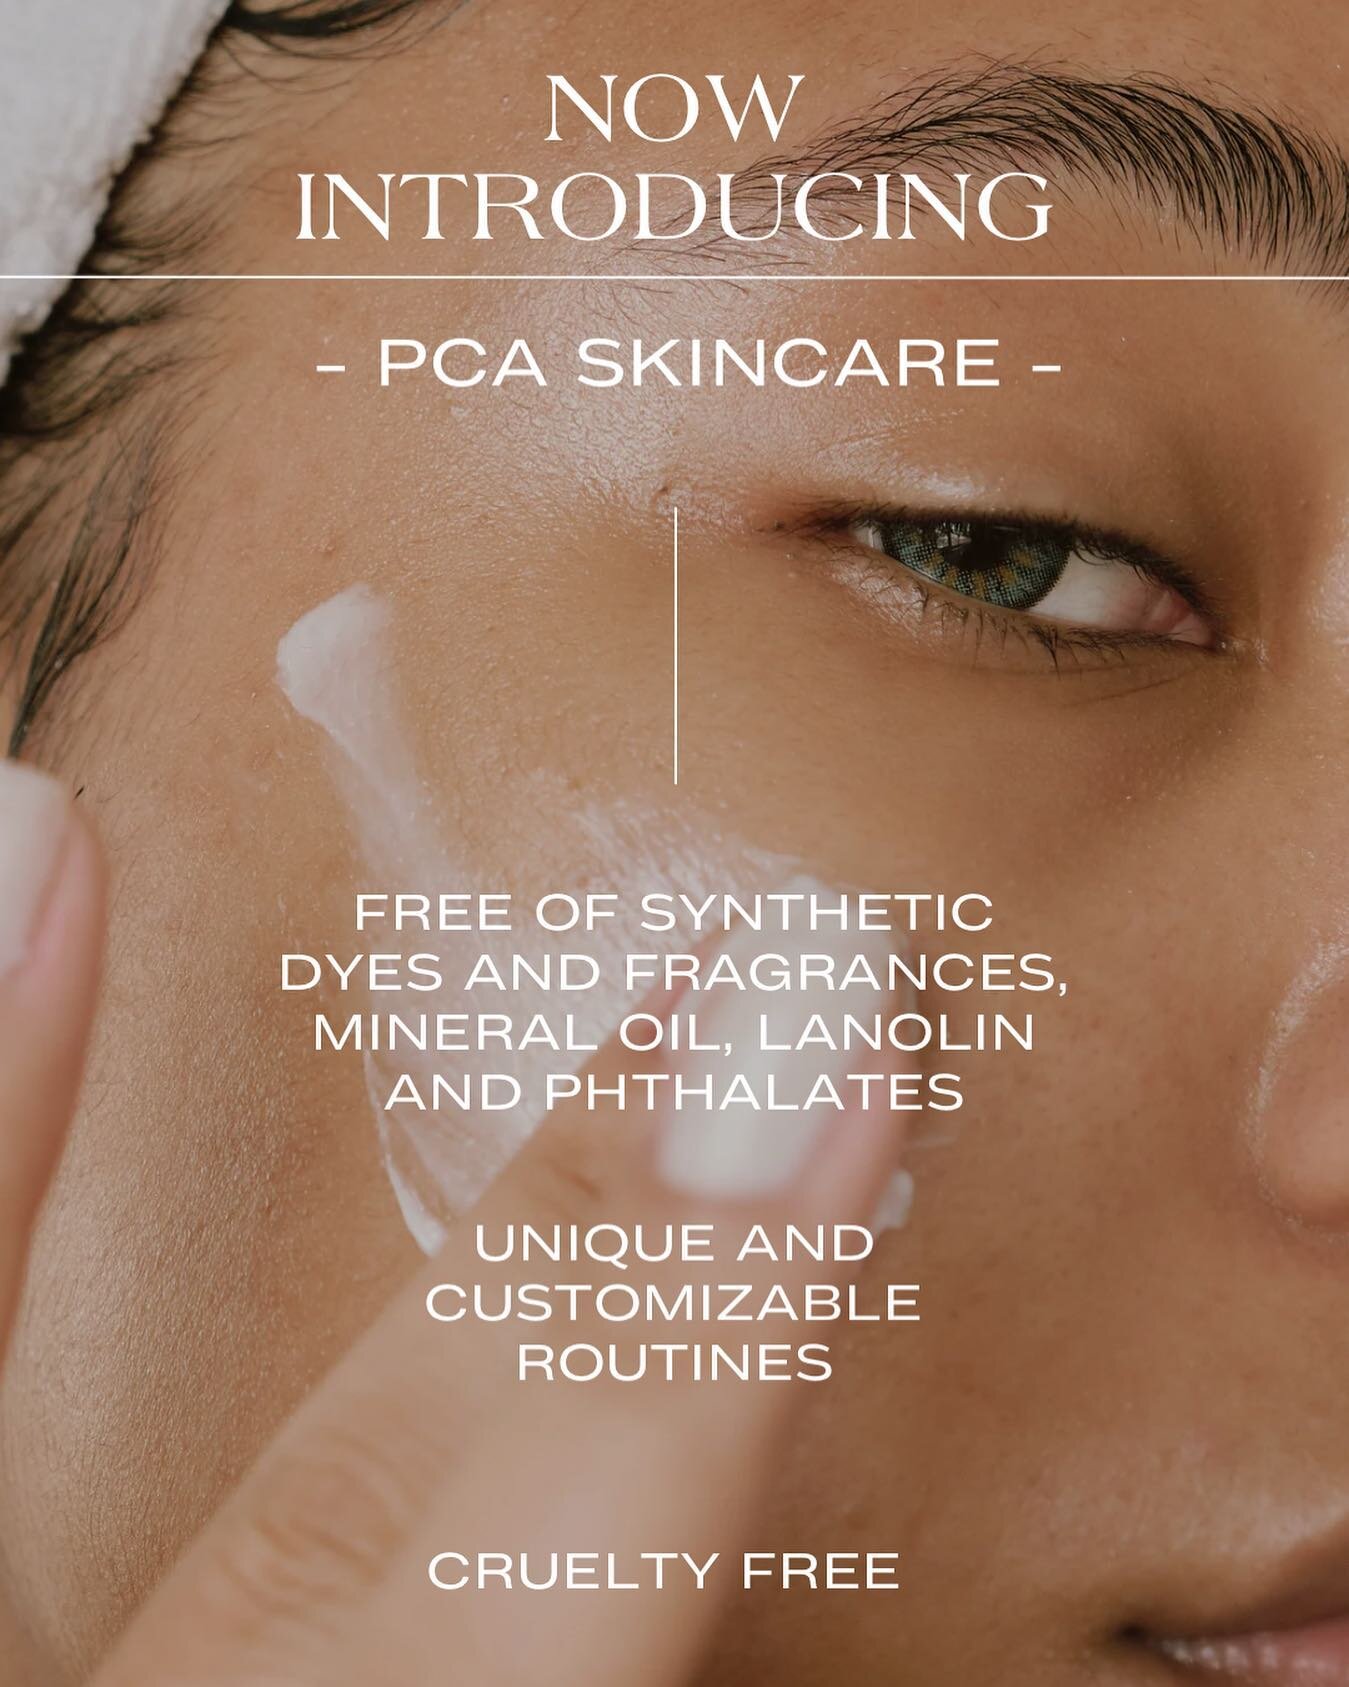 We are very excited to announce the arrival of PCA Skincare✨
We have our very own PCA Certified Professional ready to educate you on the proper skincare routine fit for YOU. 
Contact Melinda at 603-759-8288 for questions and scheduling
@melindaparadi